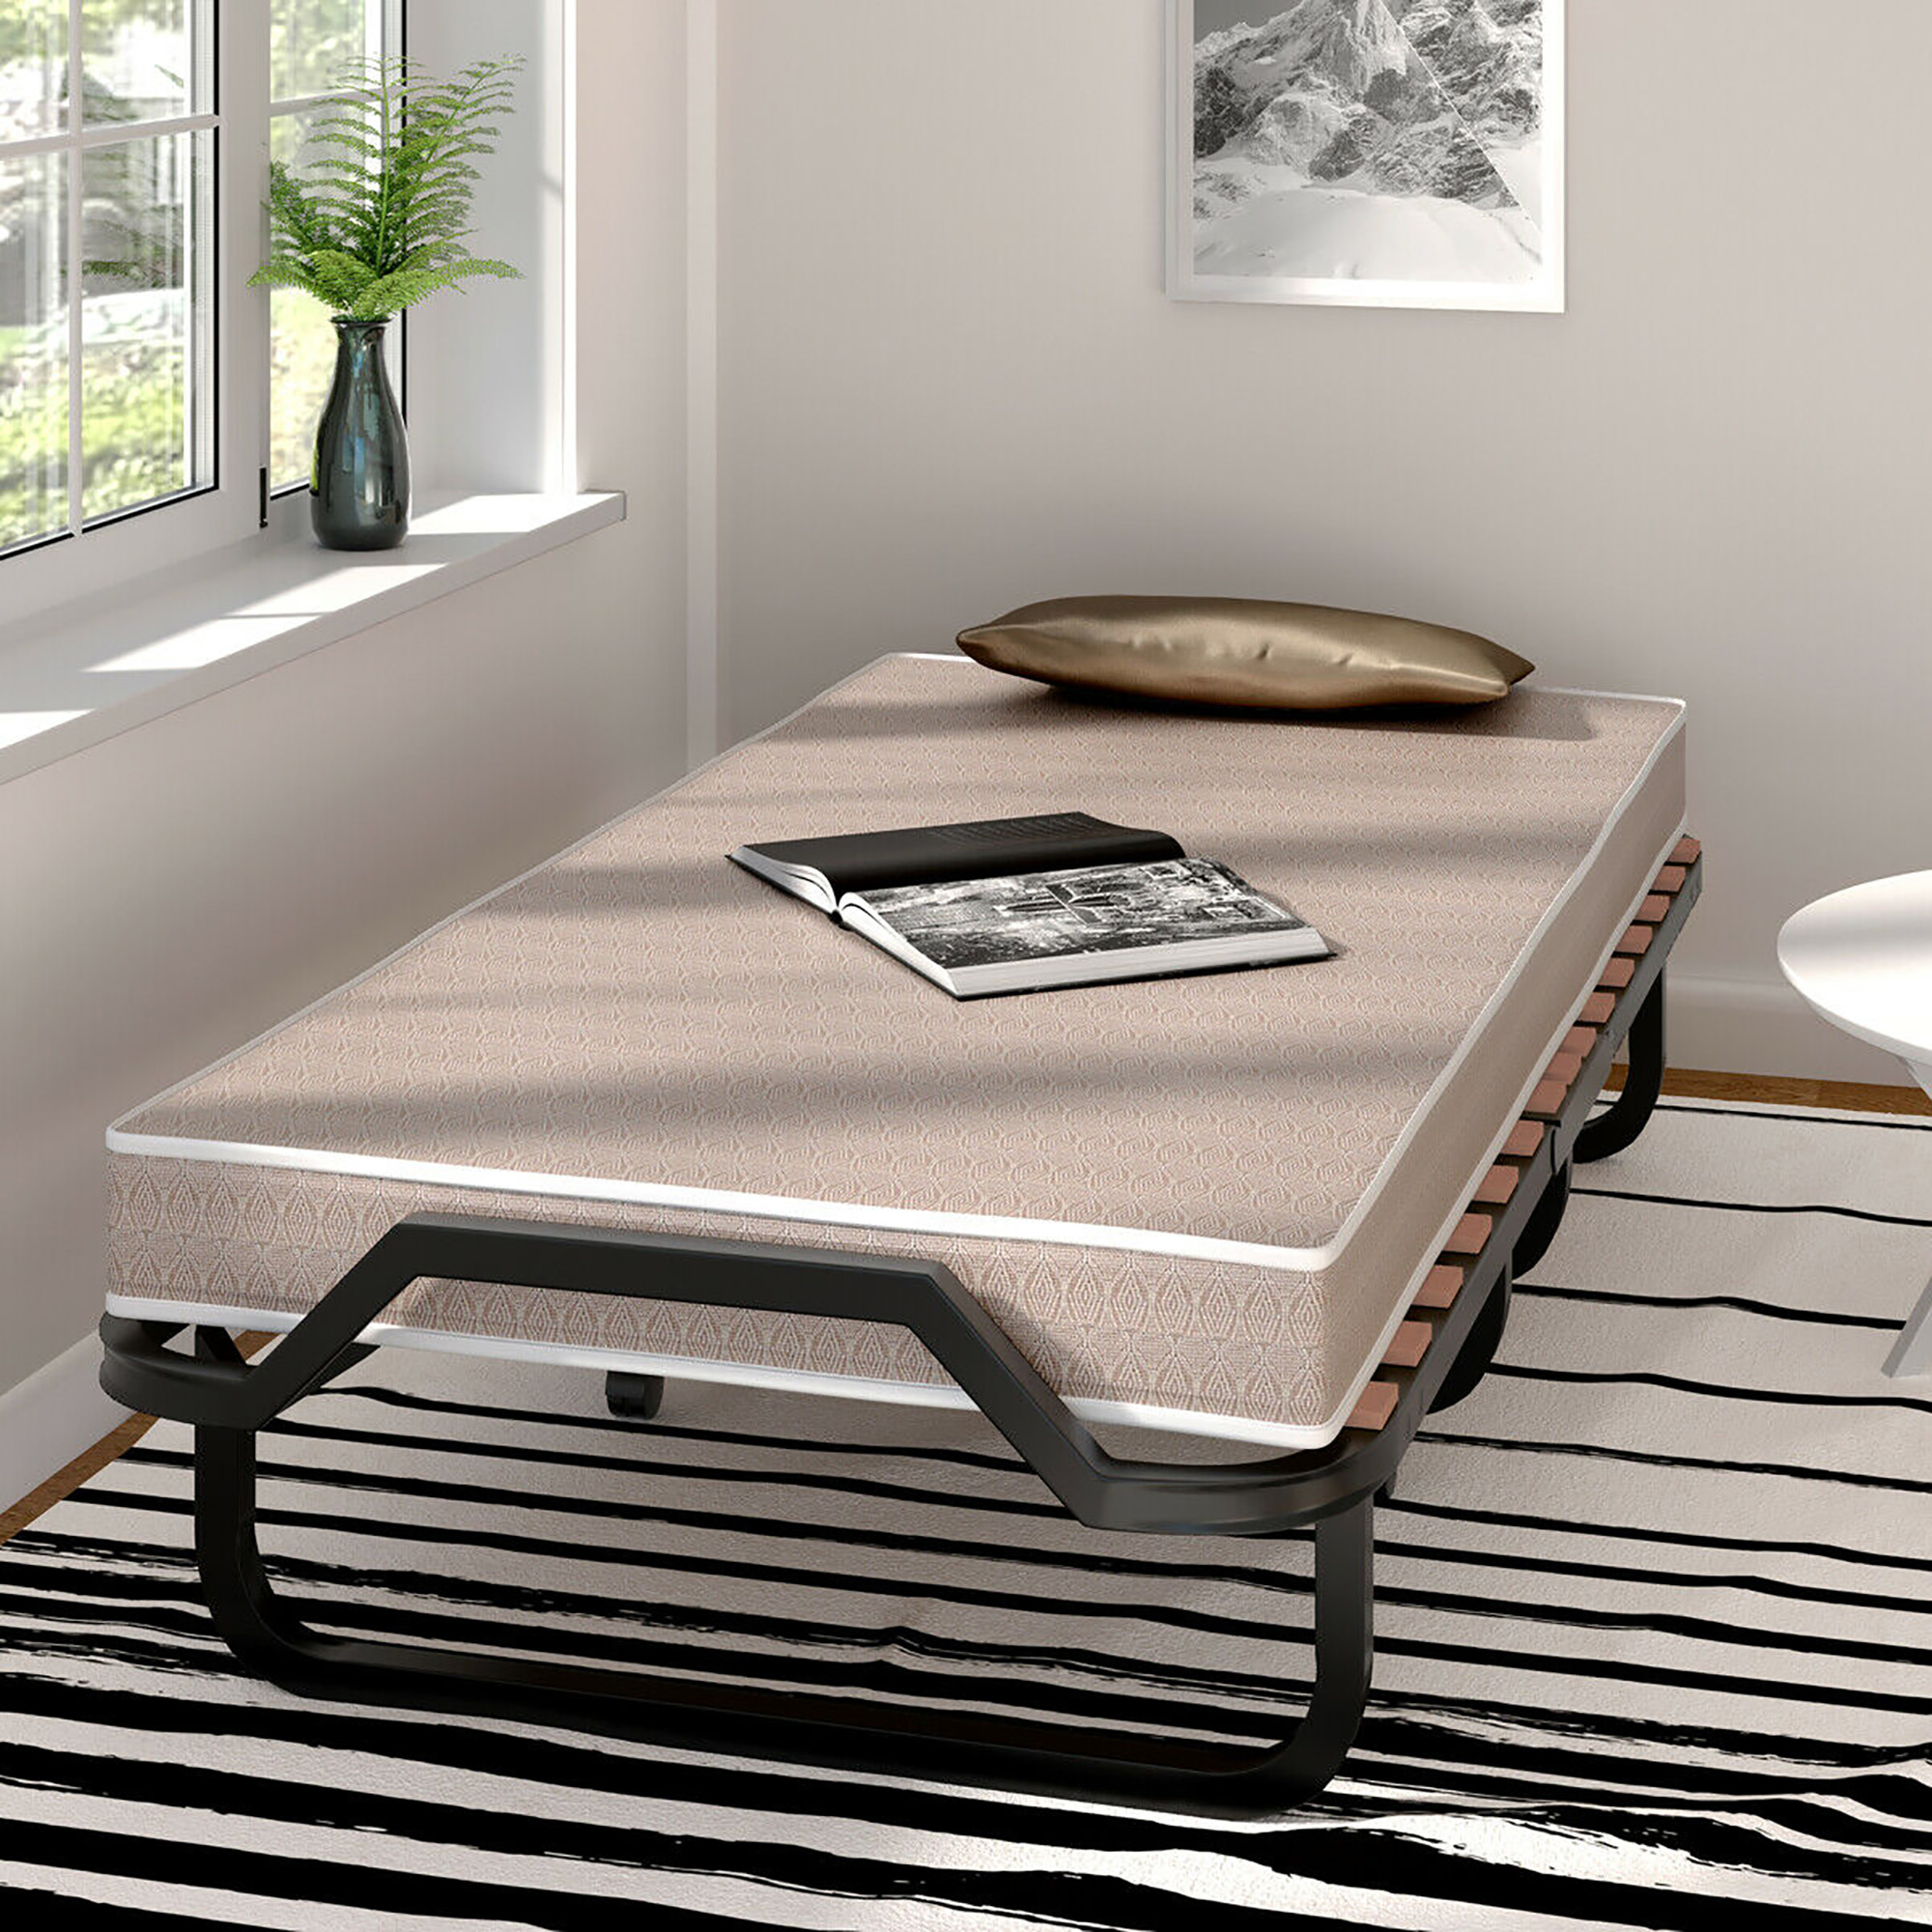 Gymax Folding Bed w/ Memory Foam Mattress Rollaway Metal Guest Bed Sleeper Made in Italy - image 4 of 10